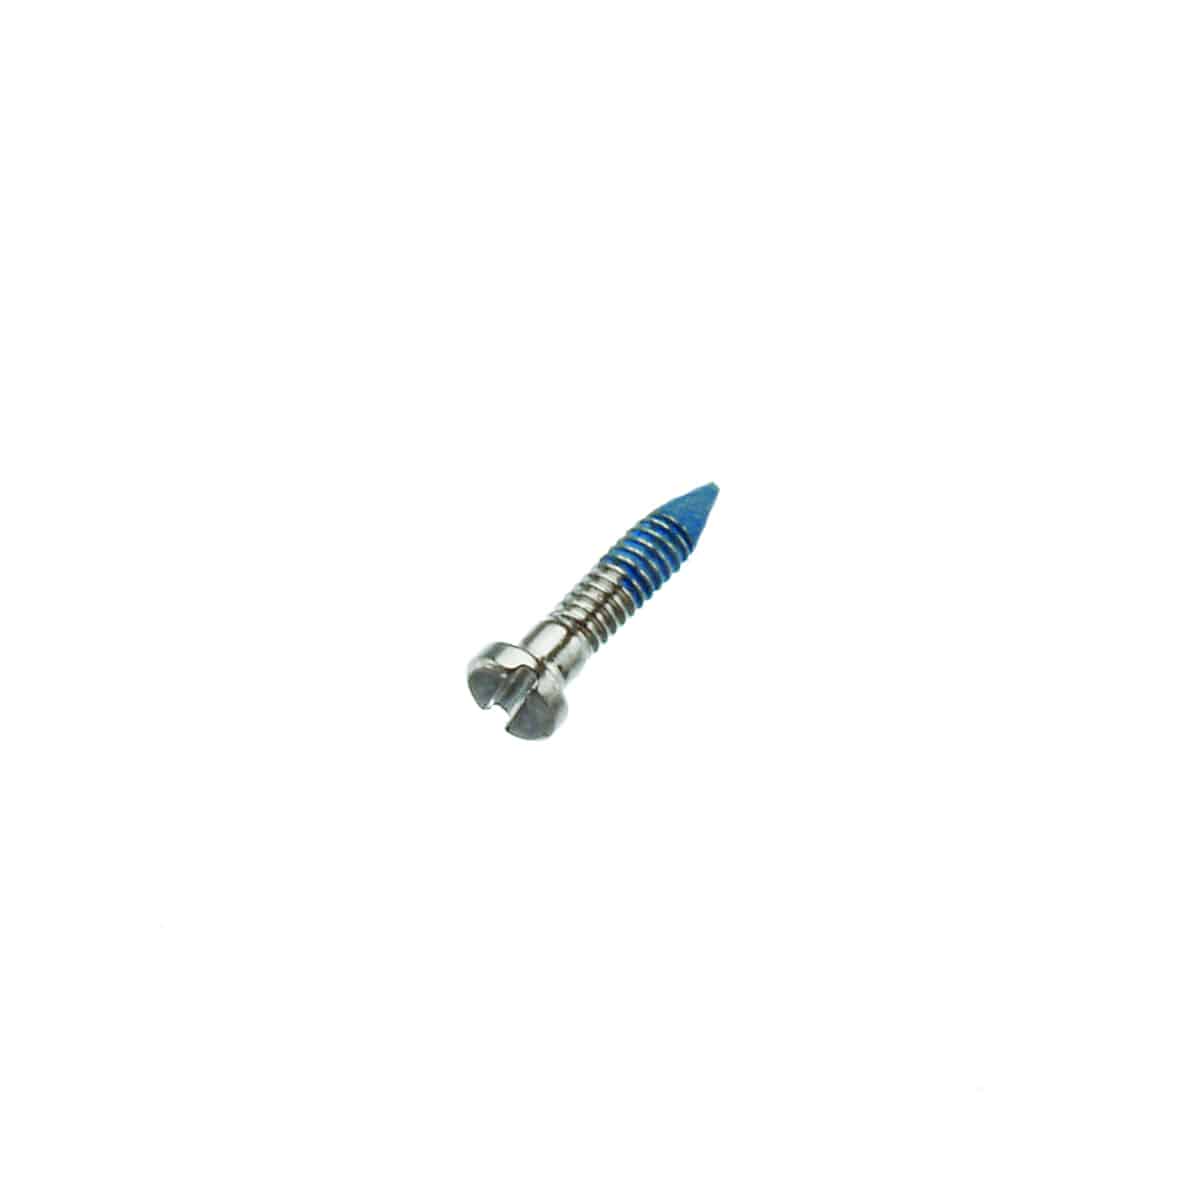 Silver Pointed Hinge Screw